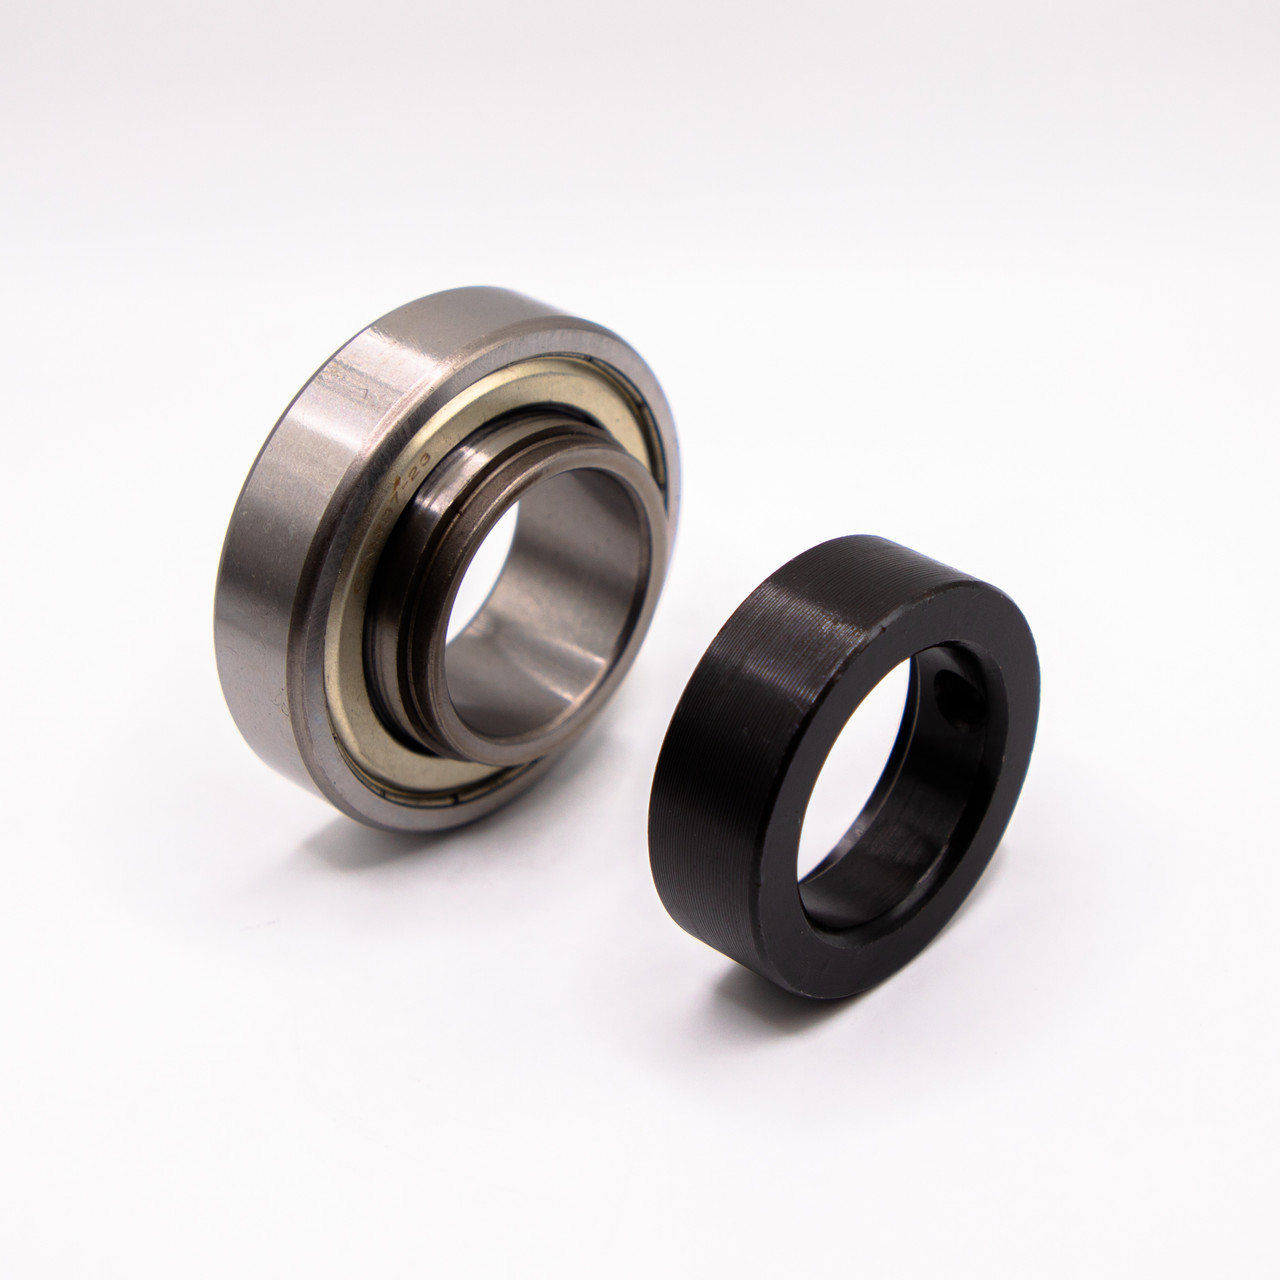 CSA201-8 Insert Ball Bearing 1/2x40x28.6 Separated Side View